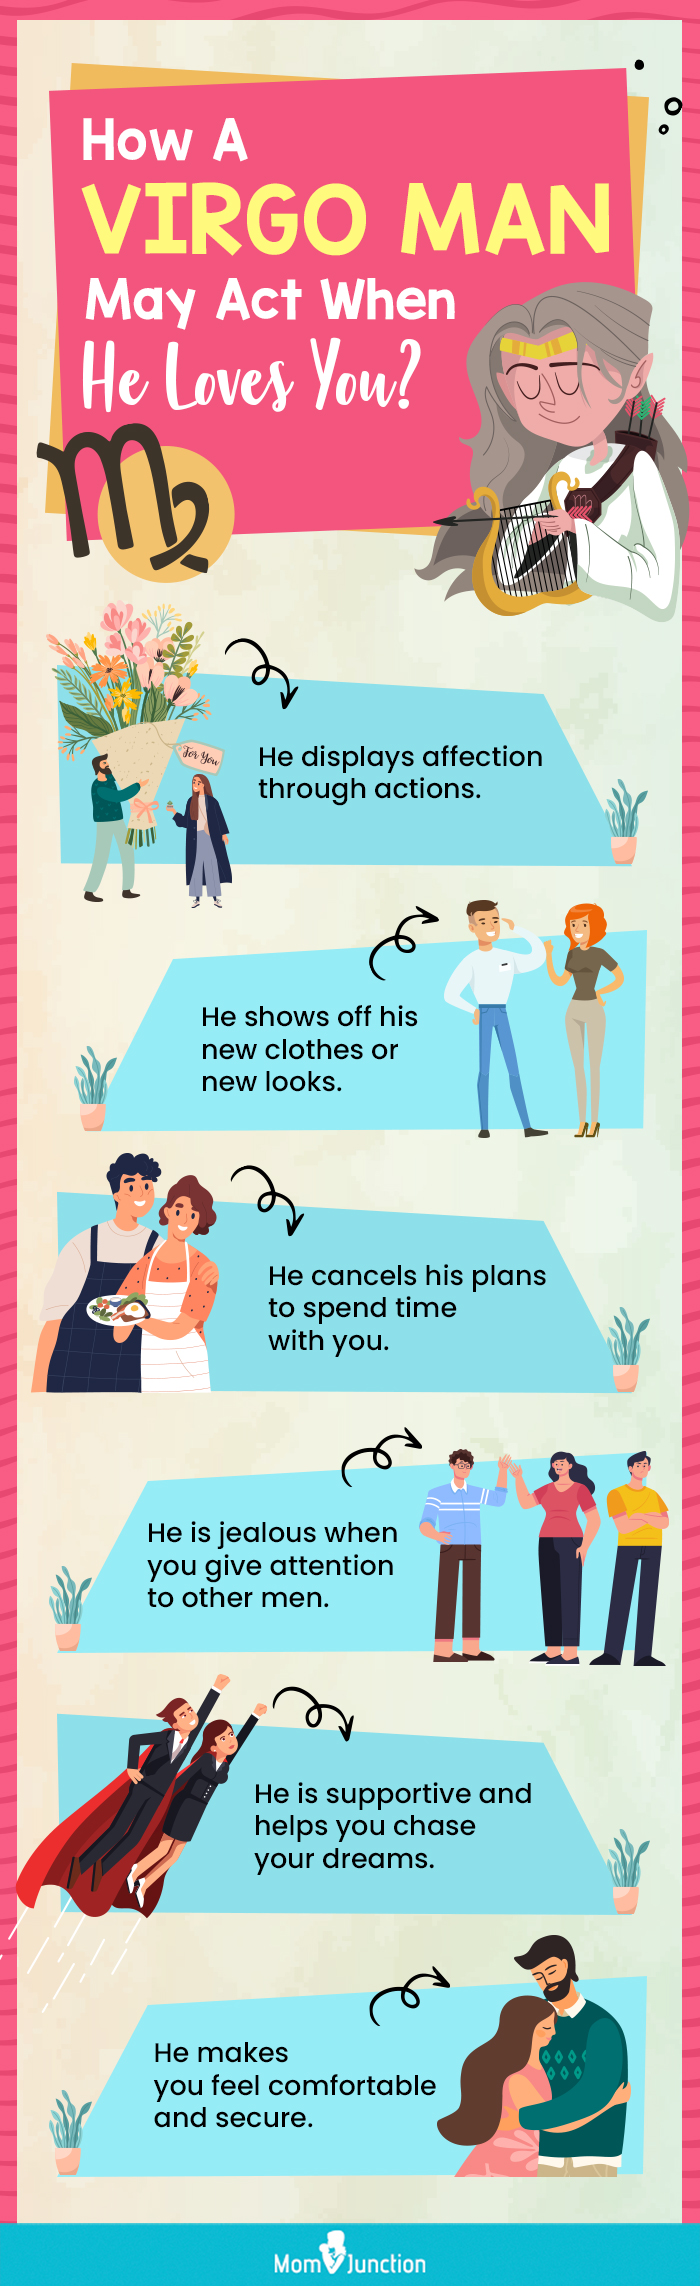 how a virgo man may act when he loves you (infographic)